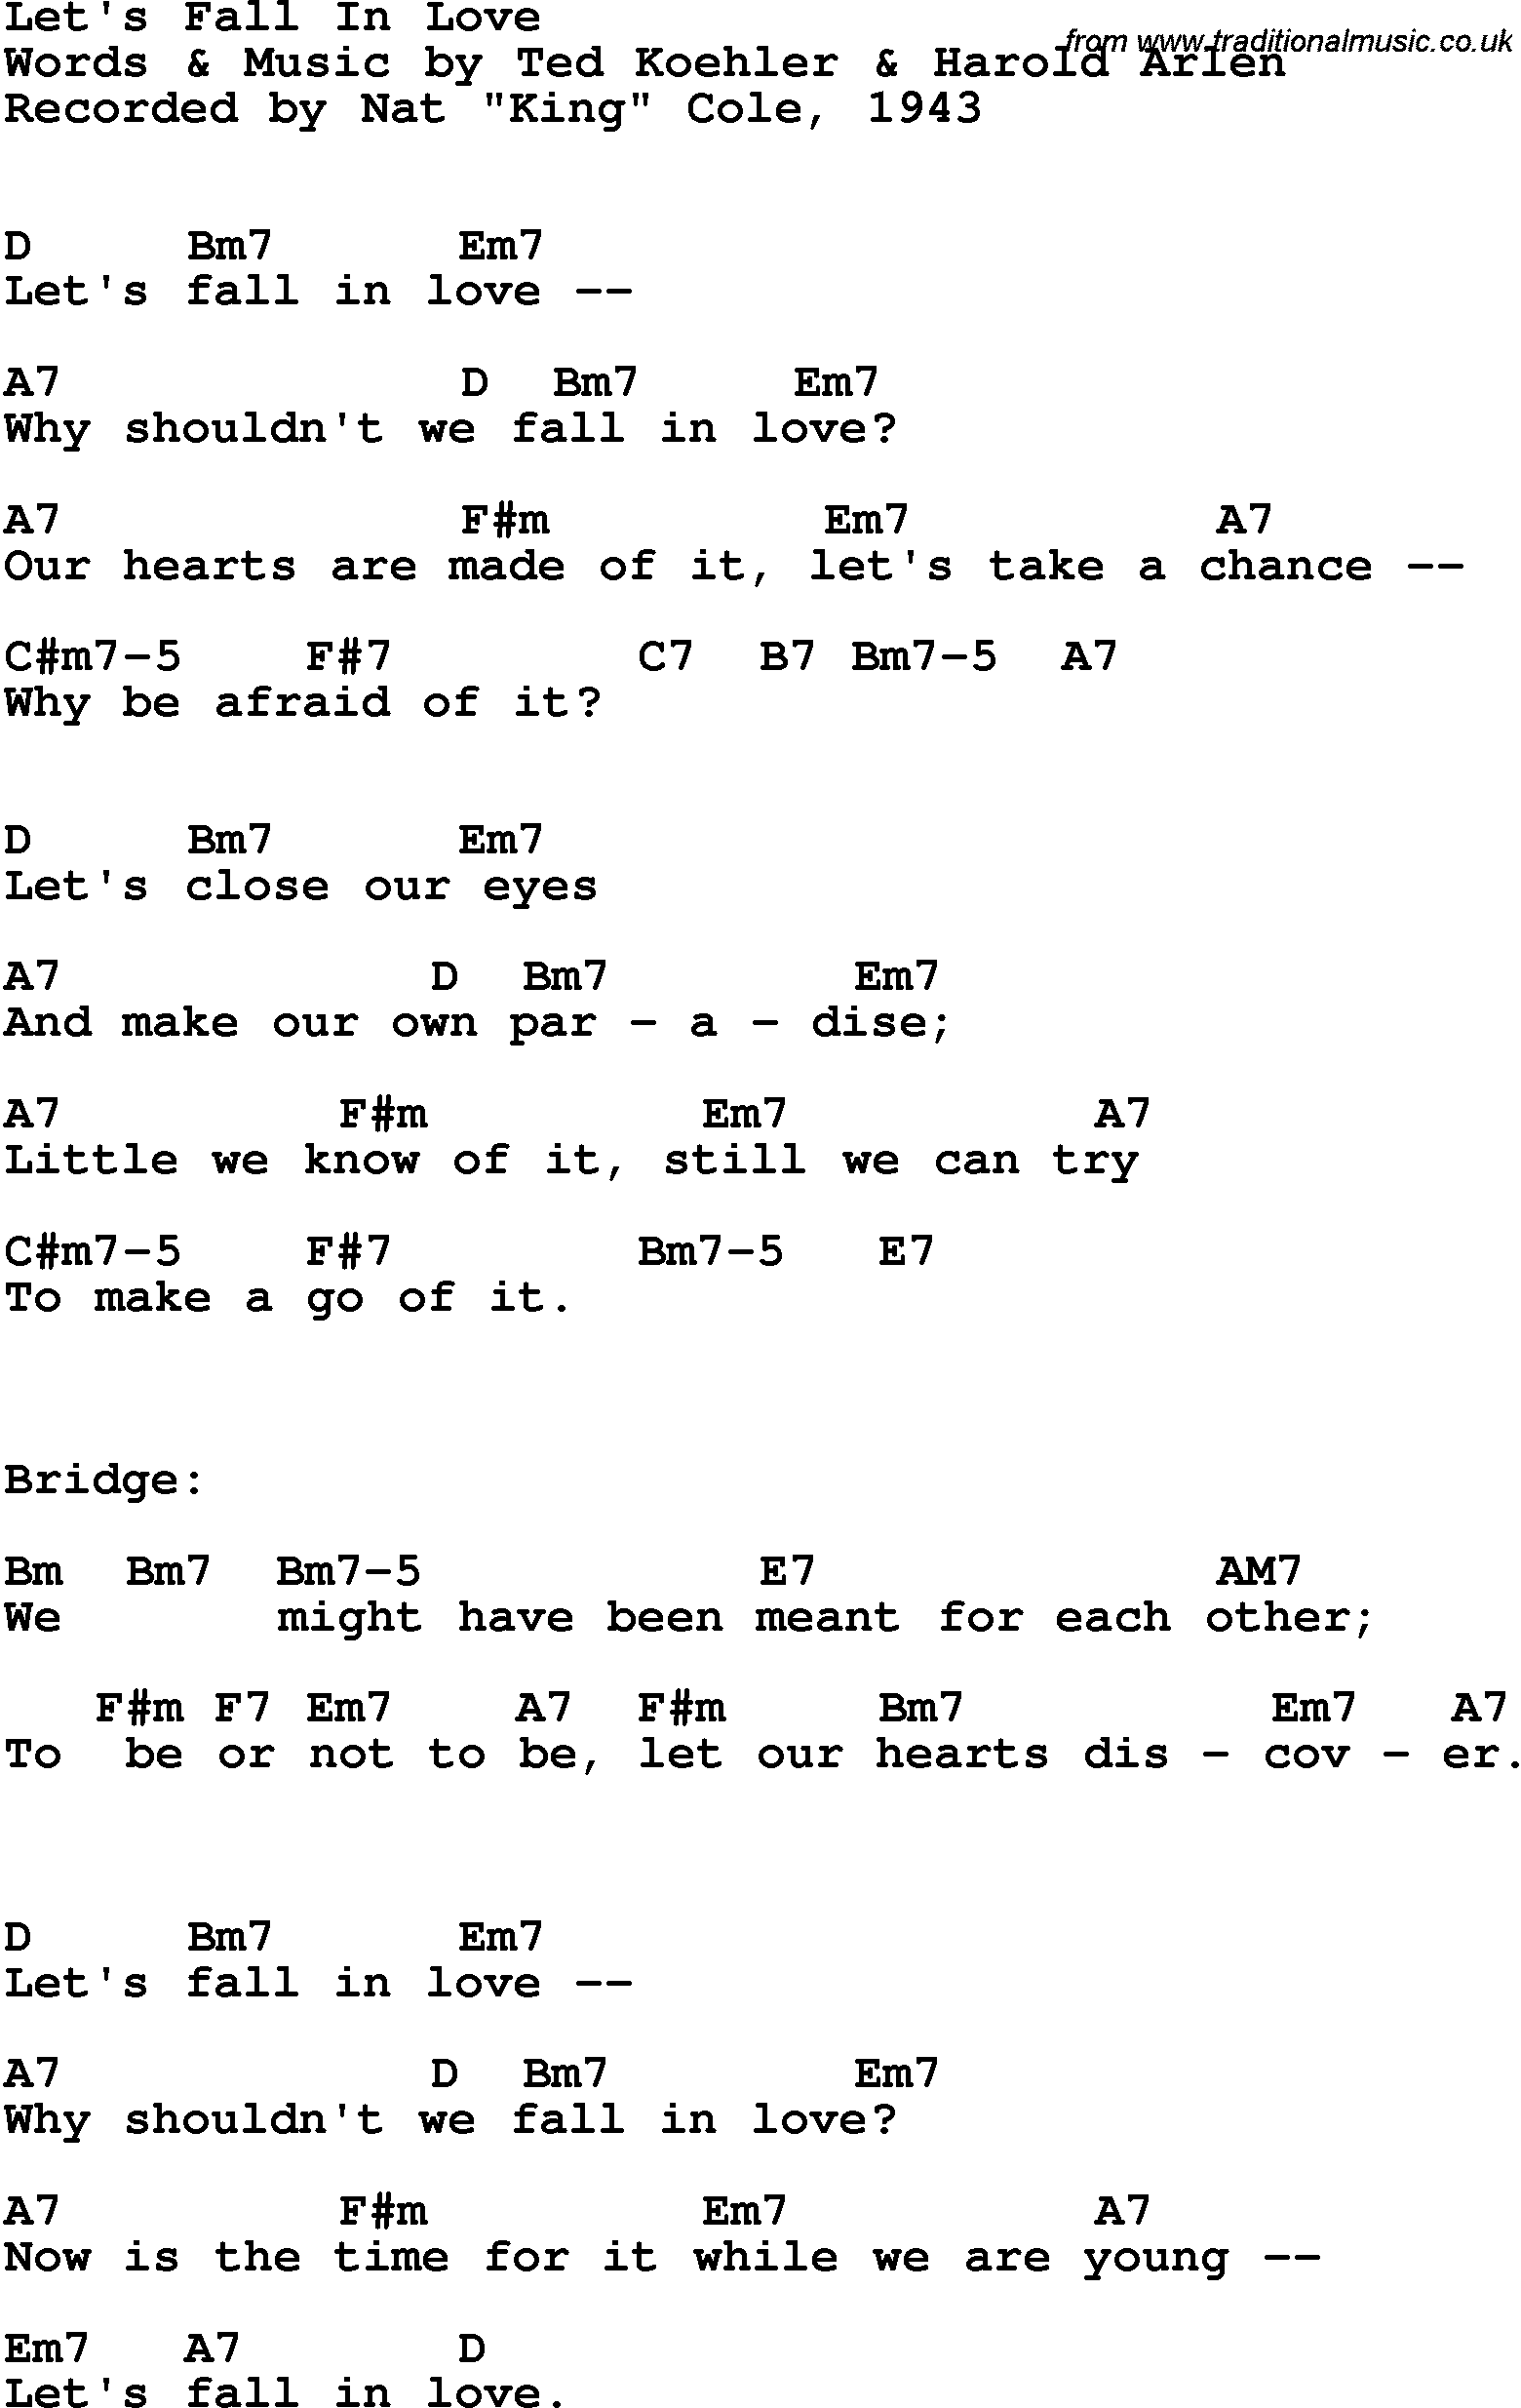 Song Lyrics with guitar chords for Let's Fall In Love - Nat King Cole, 1943